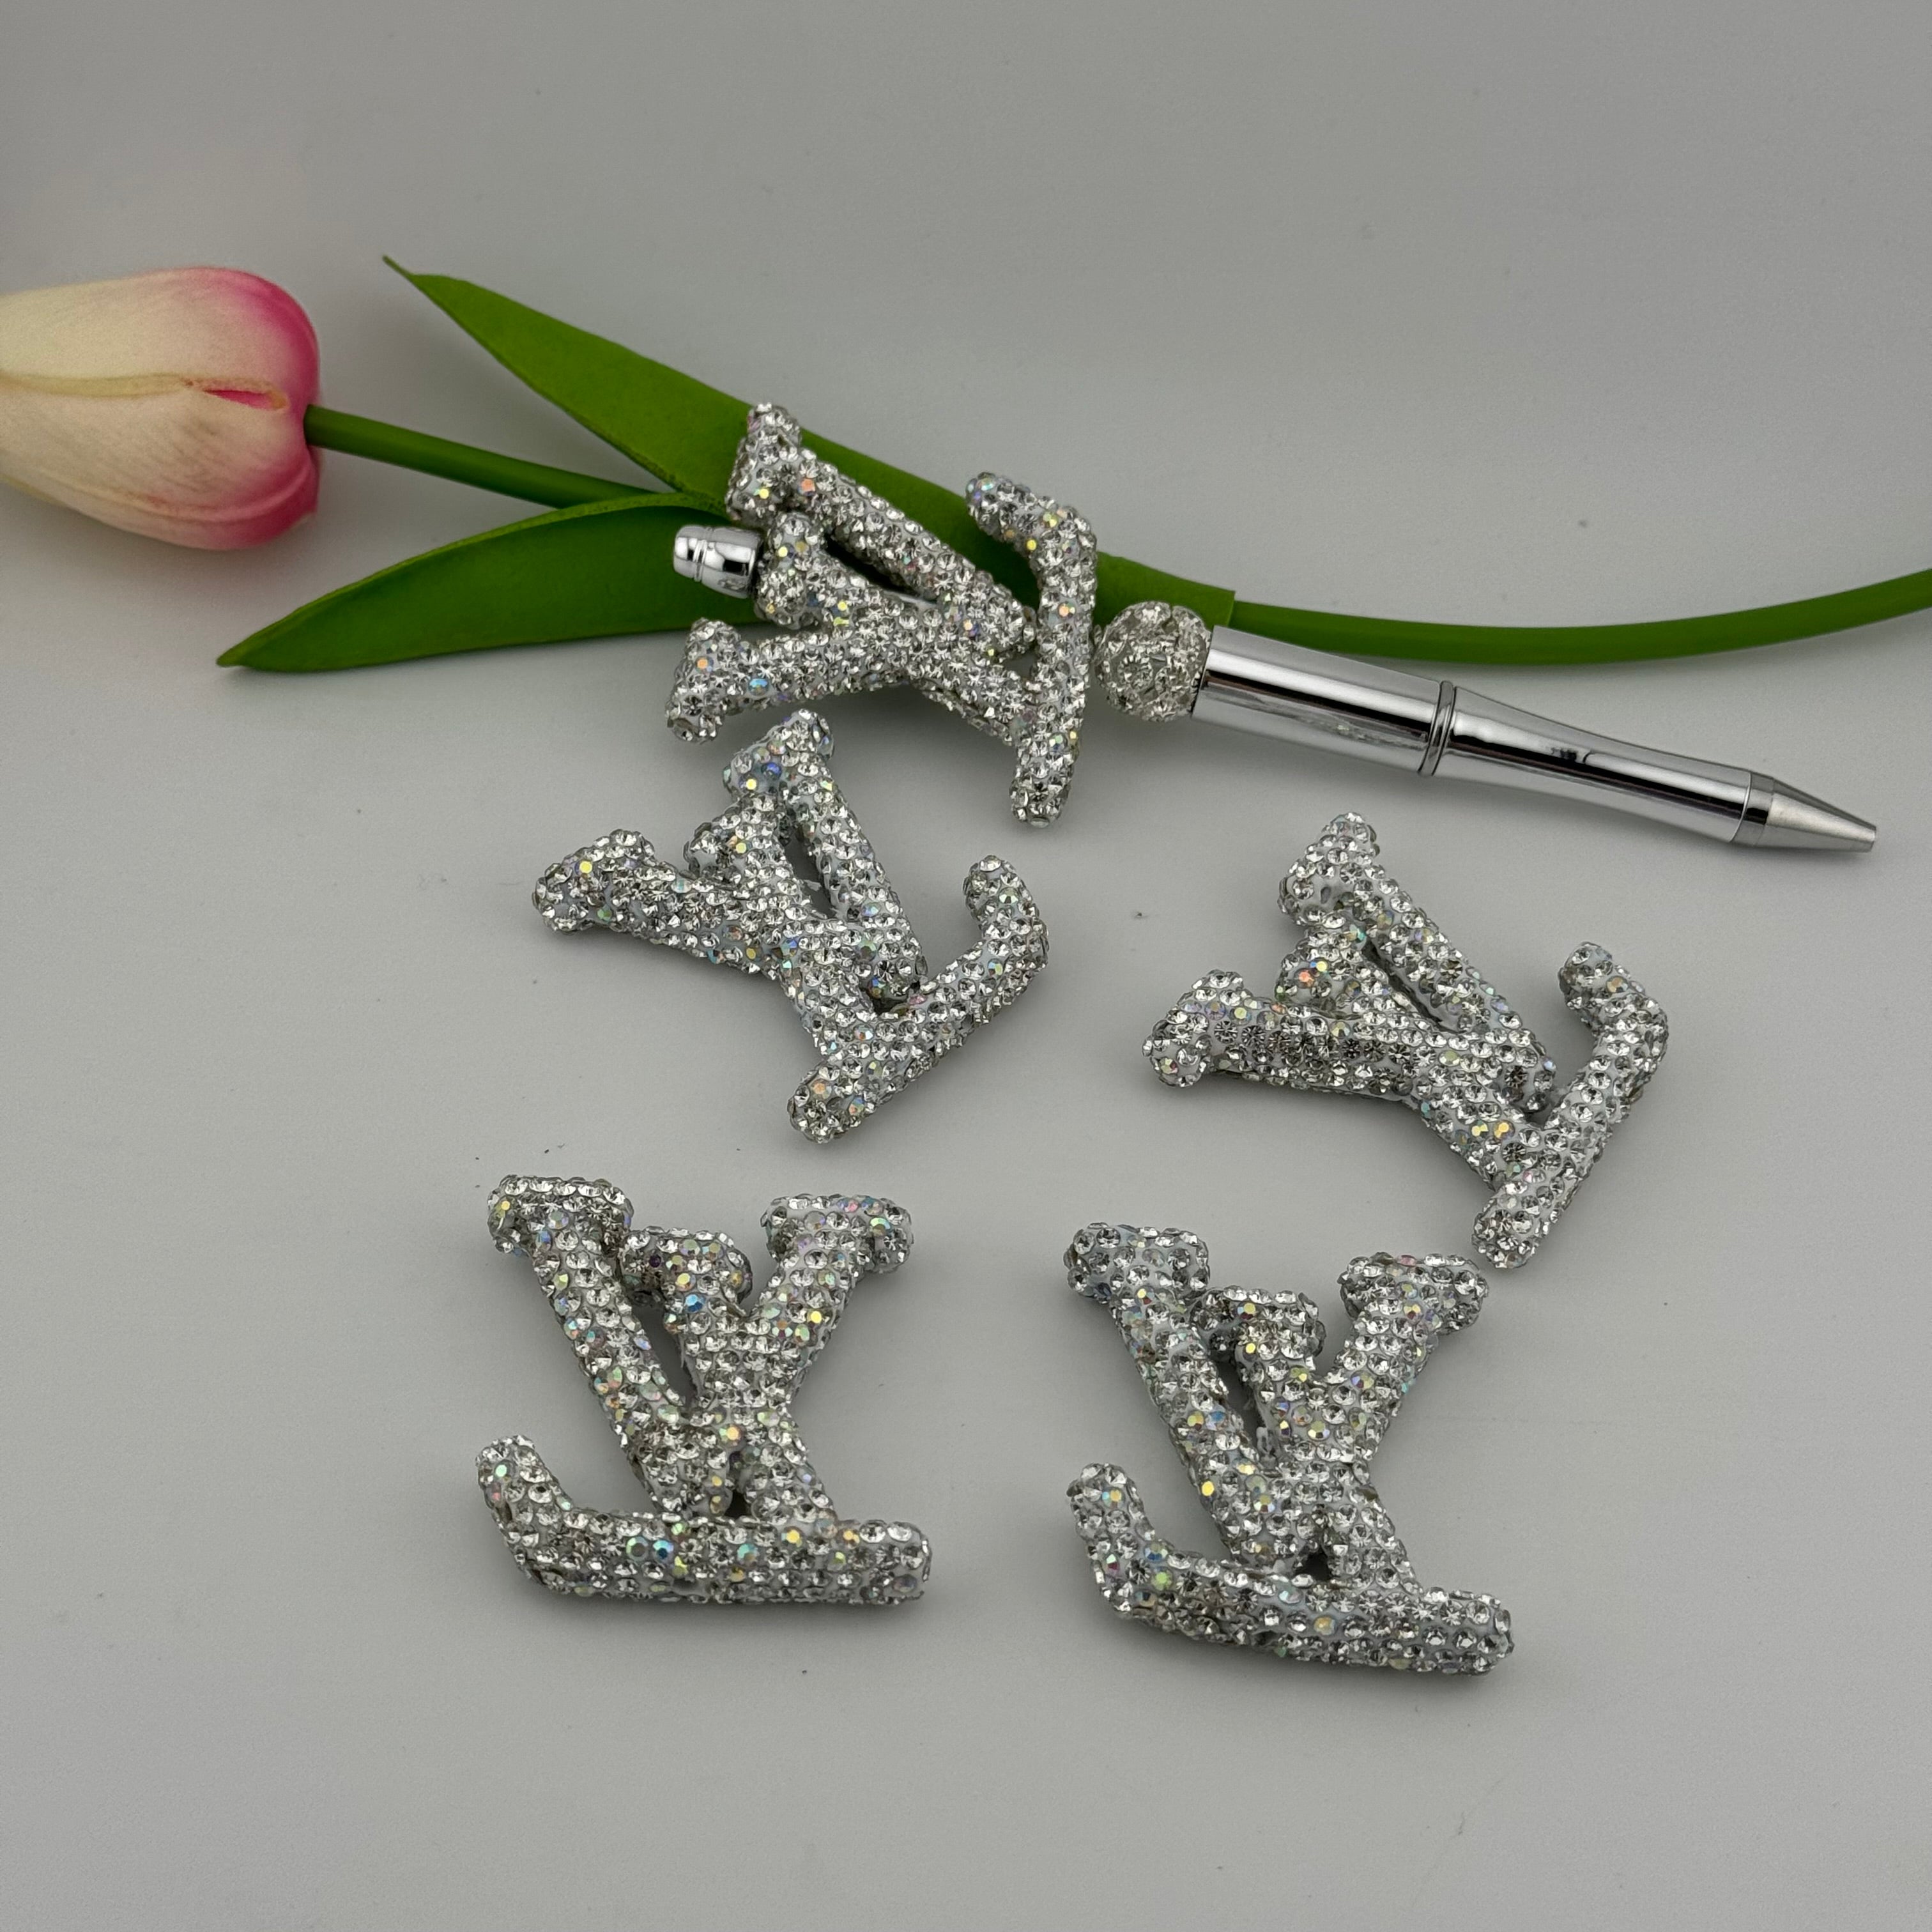 1 Pieces Big Size VV Sparkling Beads Fit For Pen